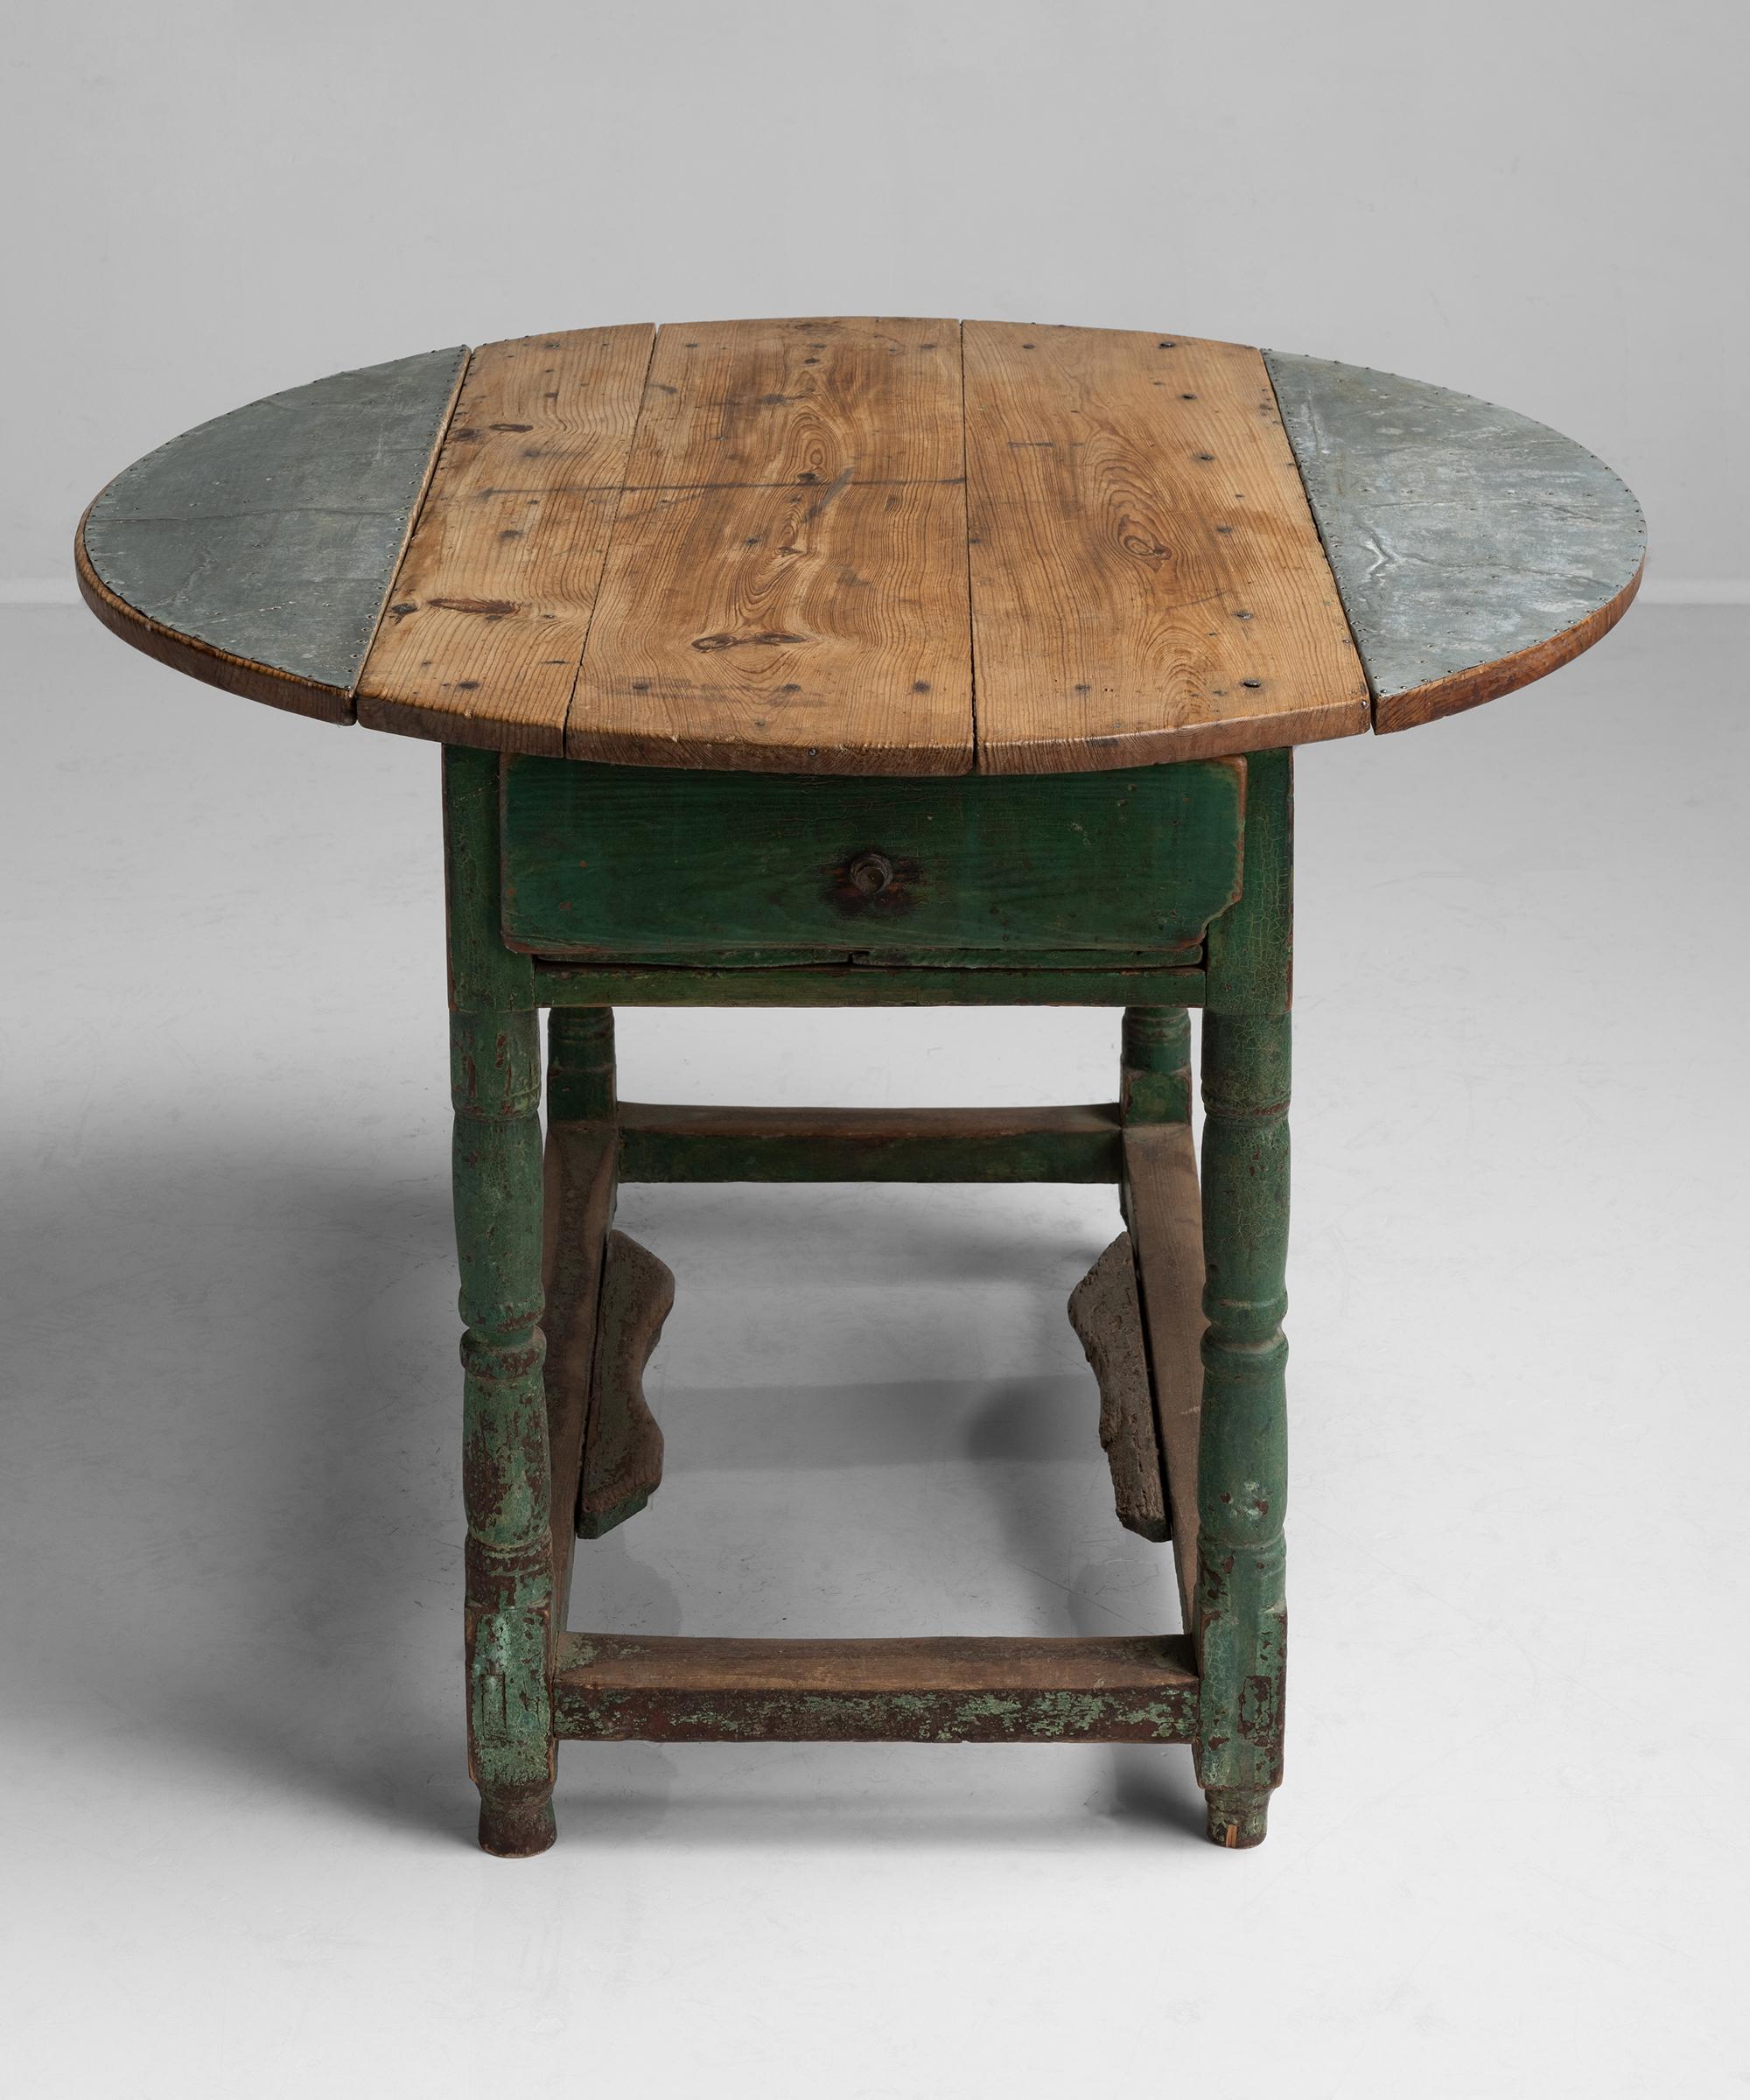 Folding top with zinc accents and remnants of original green paint.

Measures: 38” diameter x 28.5” height (fully open) 21.75” width x 38” depth x 28.5” height (sides down).
 
 
  